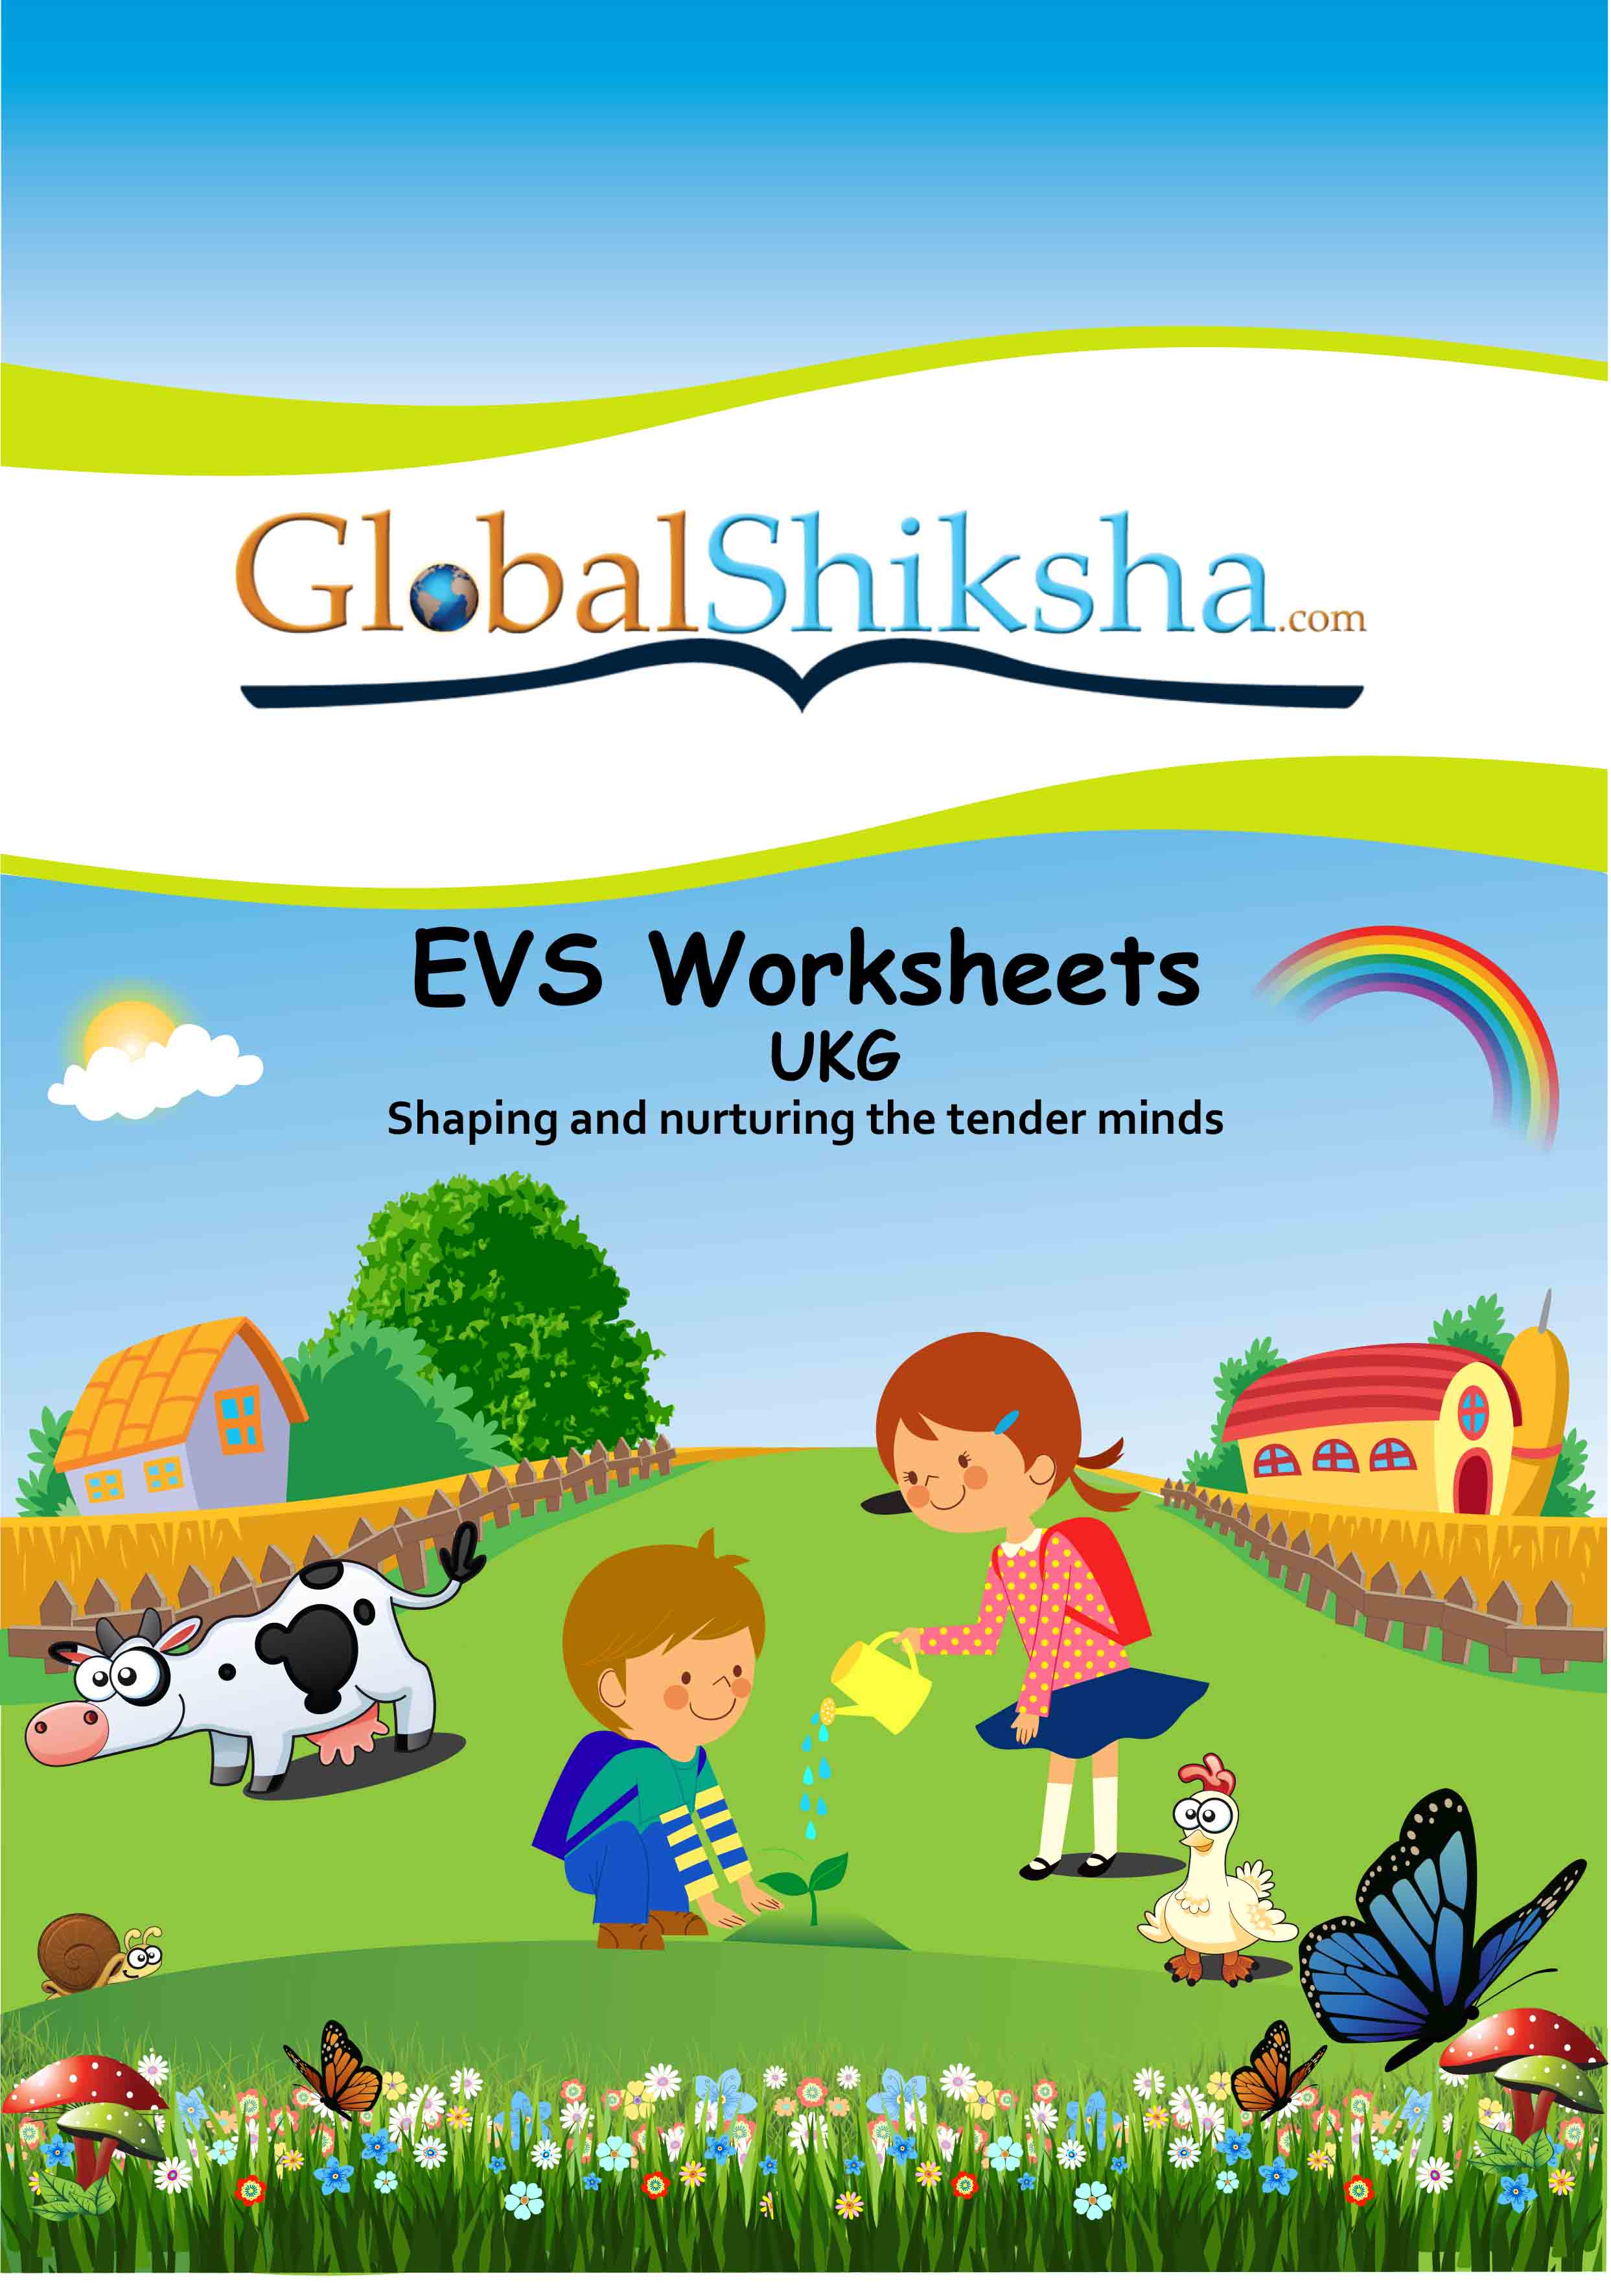 worksheets for ukg environmental science evs in india